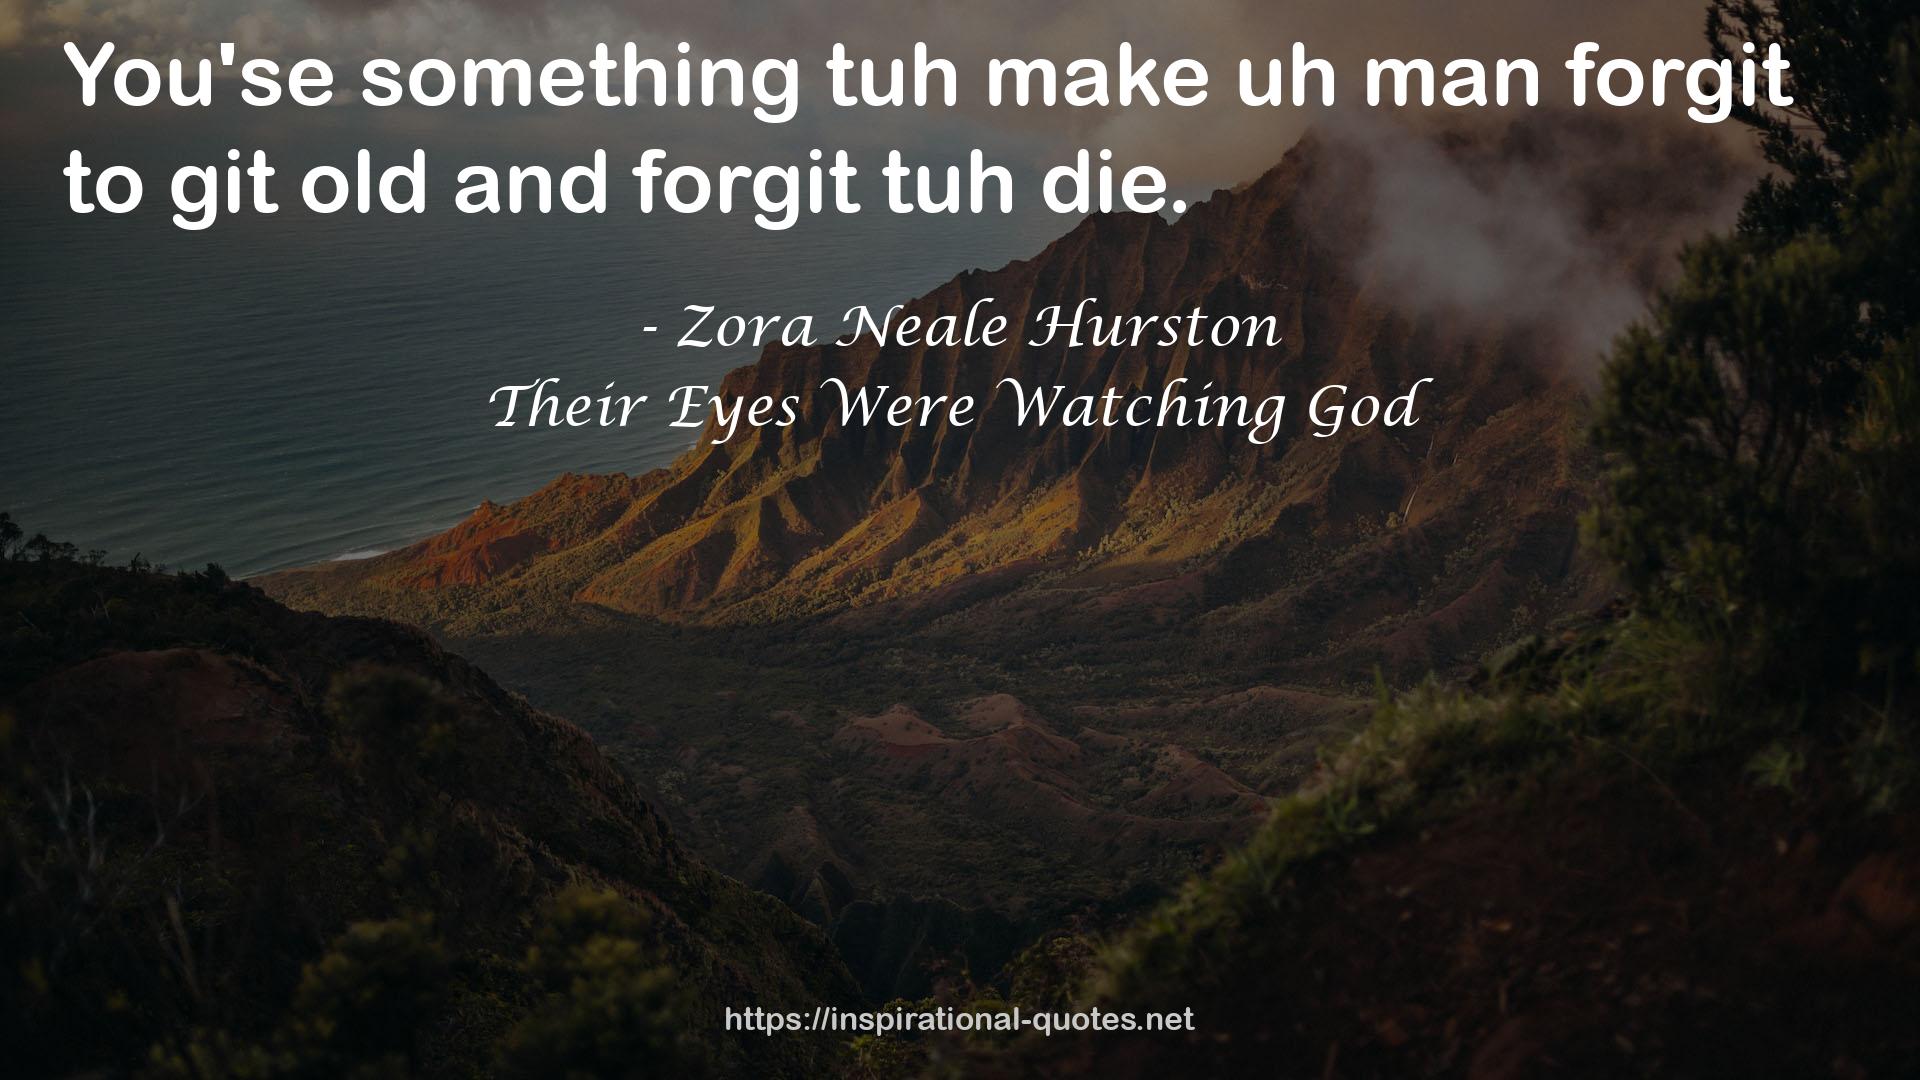 Their Eyes Were Watching God QUOTES